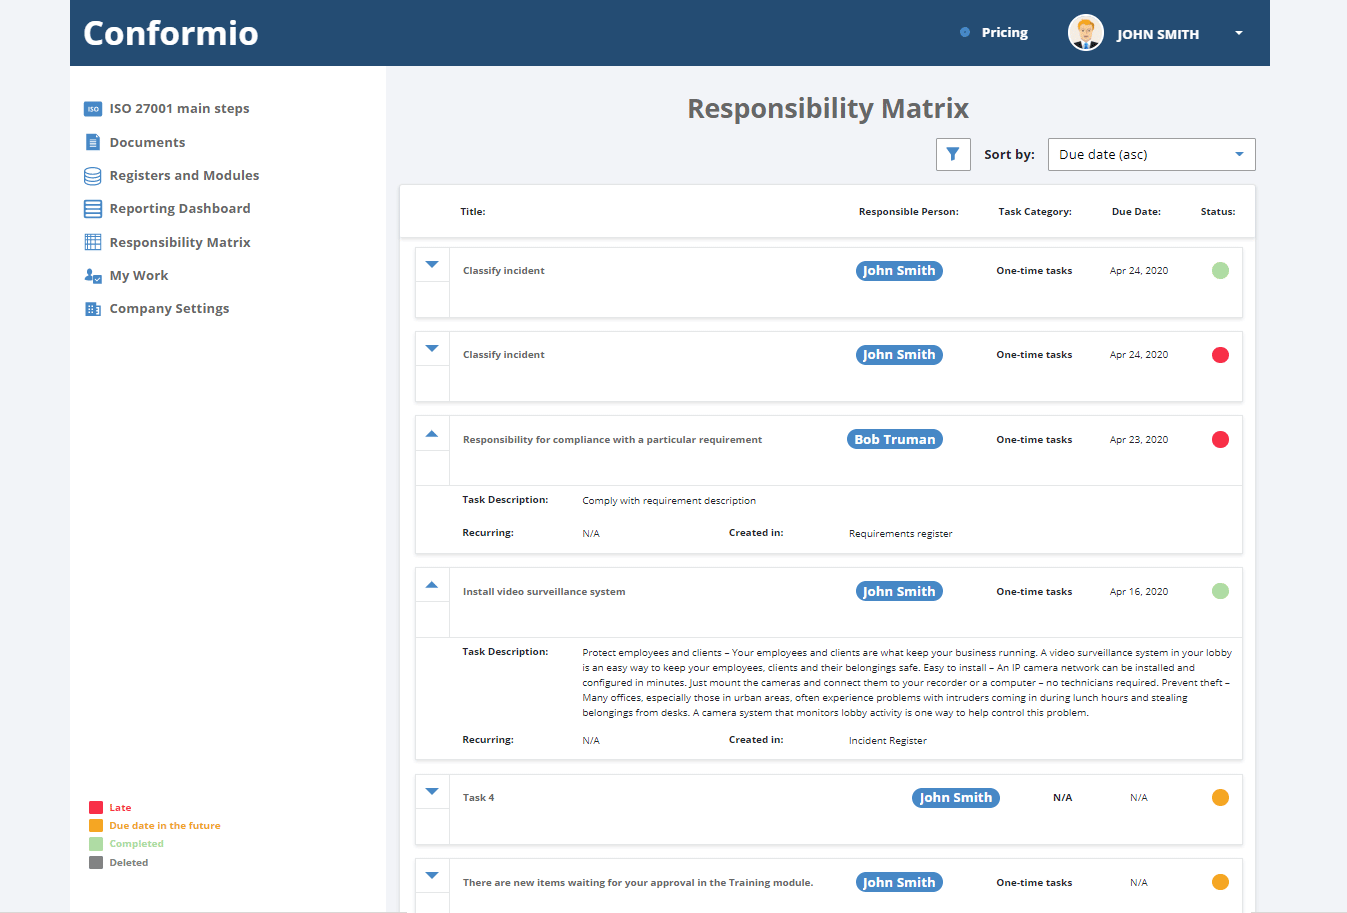 View of Responsibility matrix with tasks of all users in Conformio